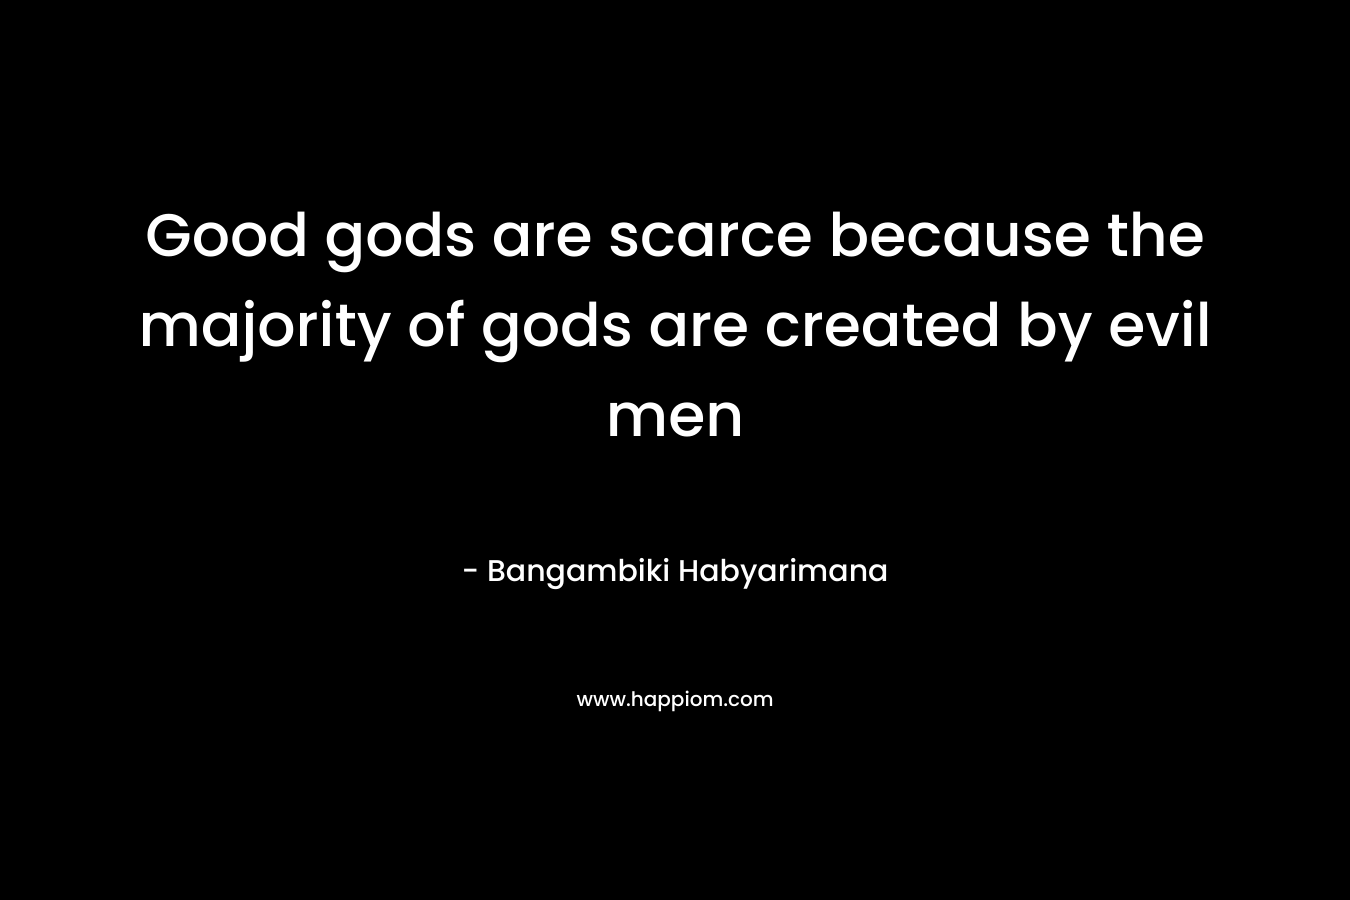 Good gods are scarce because the majority of gods are created by evil men